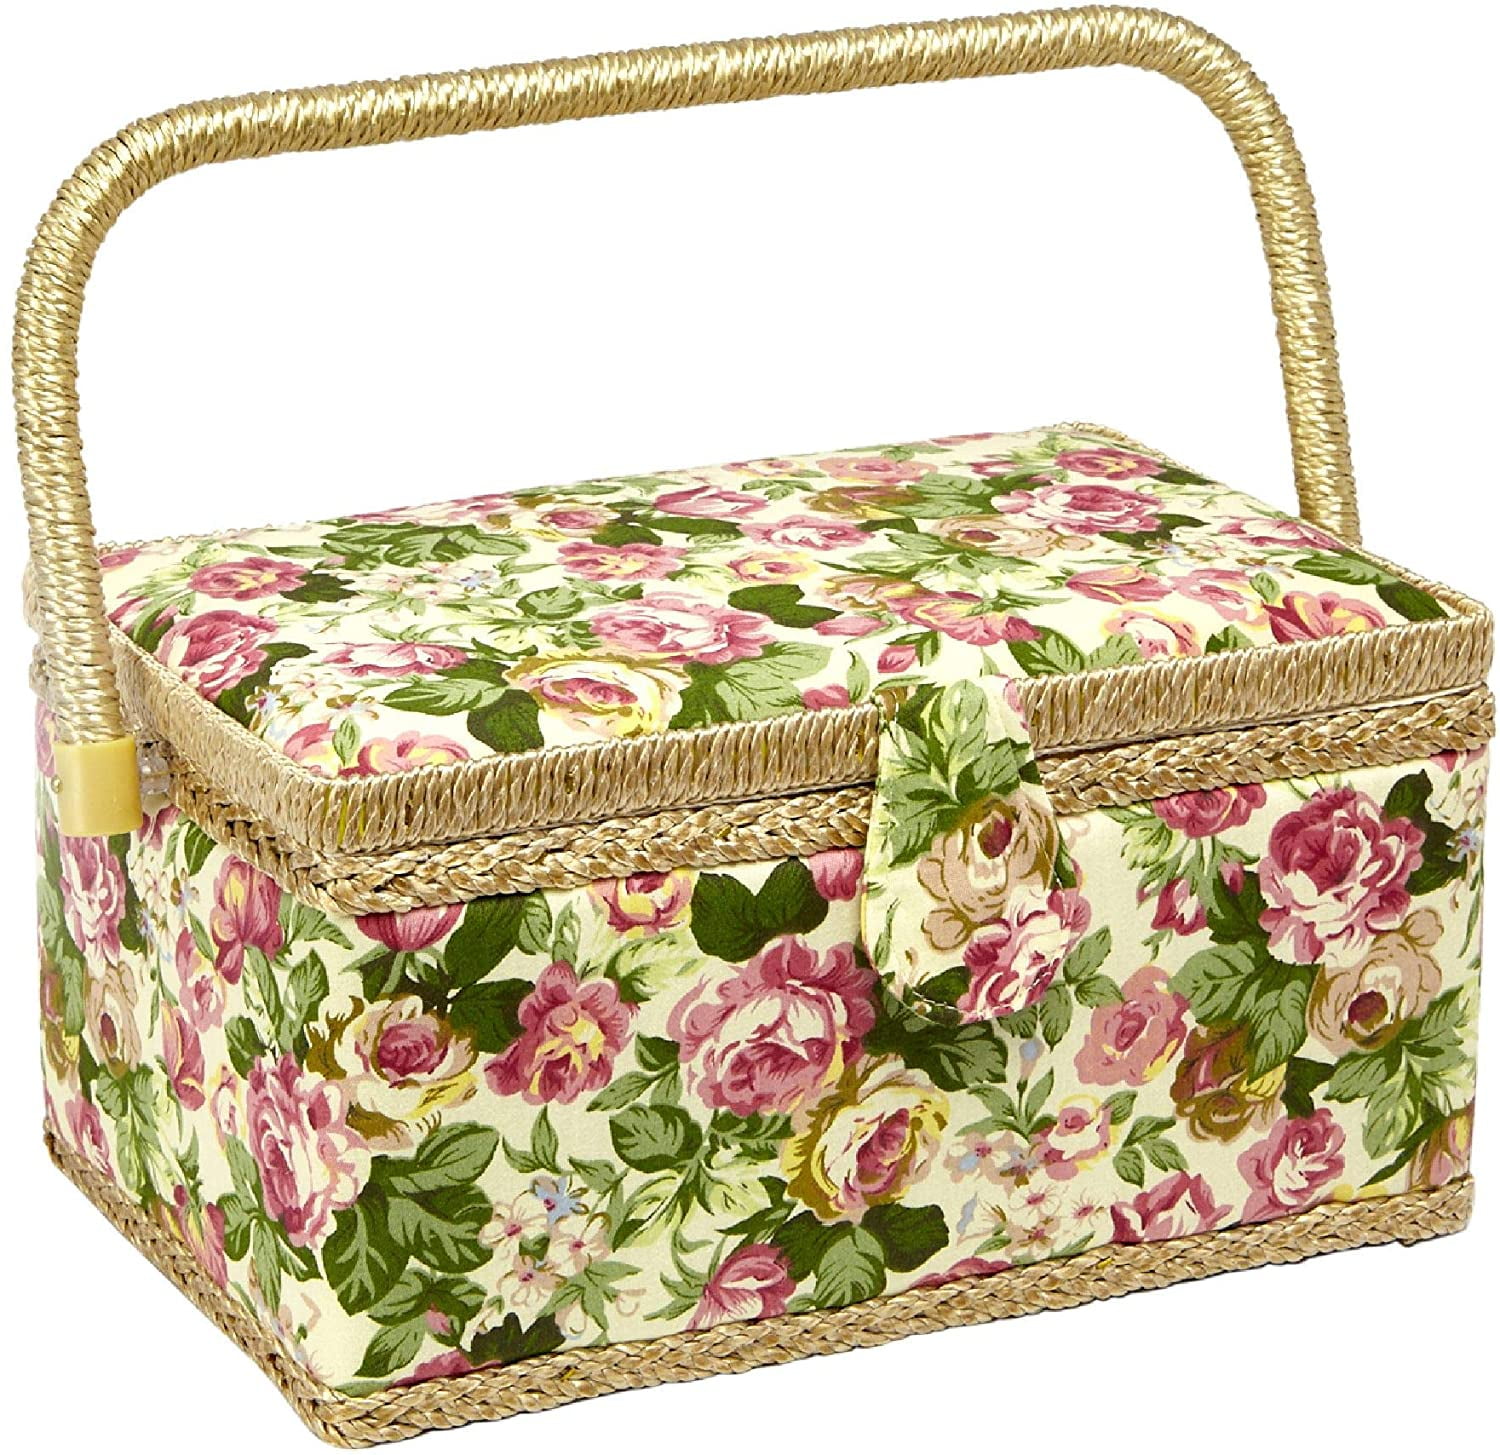 Garden rose Household Fabric Craft Handmade Sewing Basket Thread Needle Storage Box Organizer Sewing Kit Storage Box with Removable Tray 